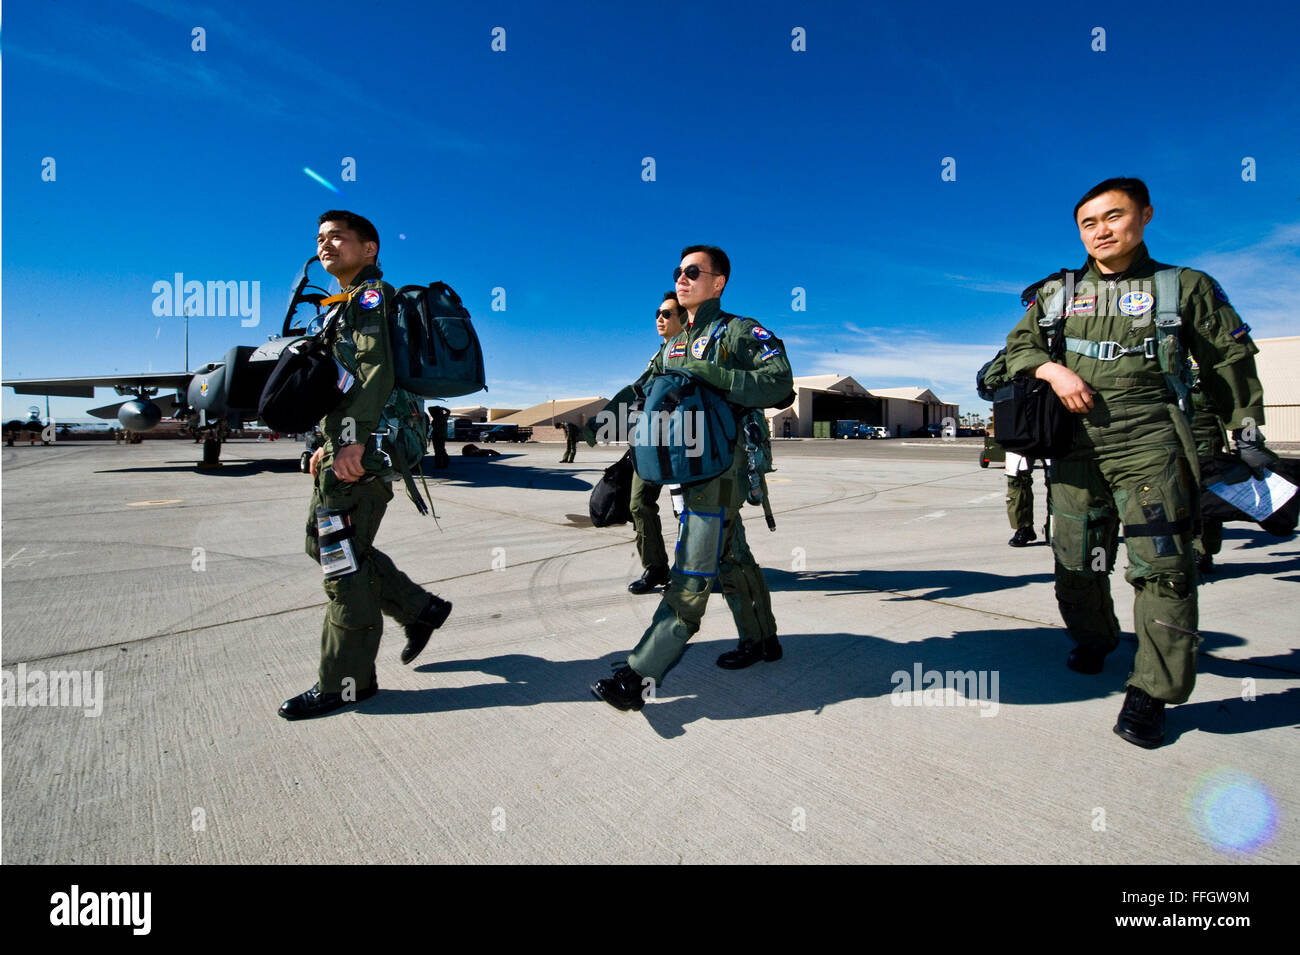 Republic of Korea Air Force pilots walk toward their F-15 Strike Eagles during Red Flag 12-2 at Nellis Air Force Base, Nev. Red Flag is a combat training exercise involving the air forces of the United States and its allies. The exercise is hosted north of Las Vegas on the Nevada Test and Training Range. Stock Photo